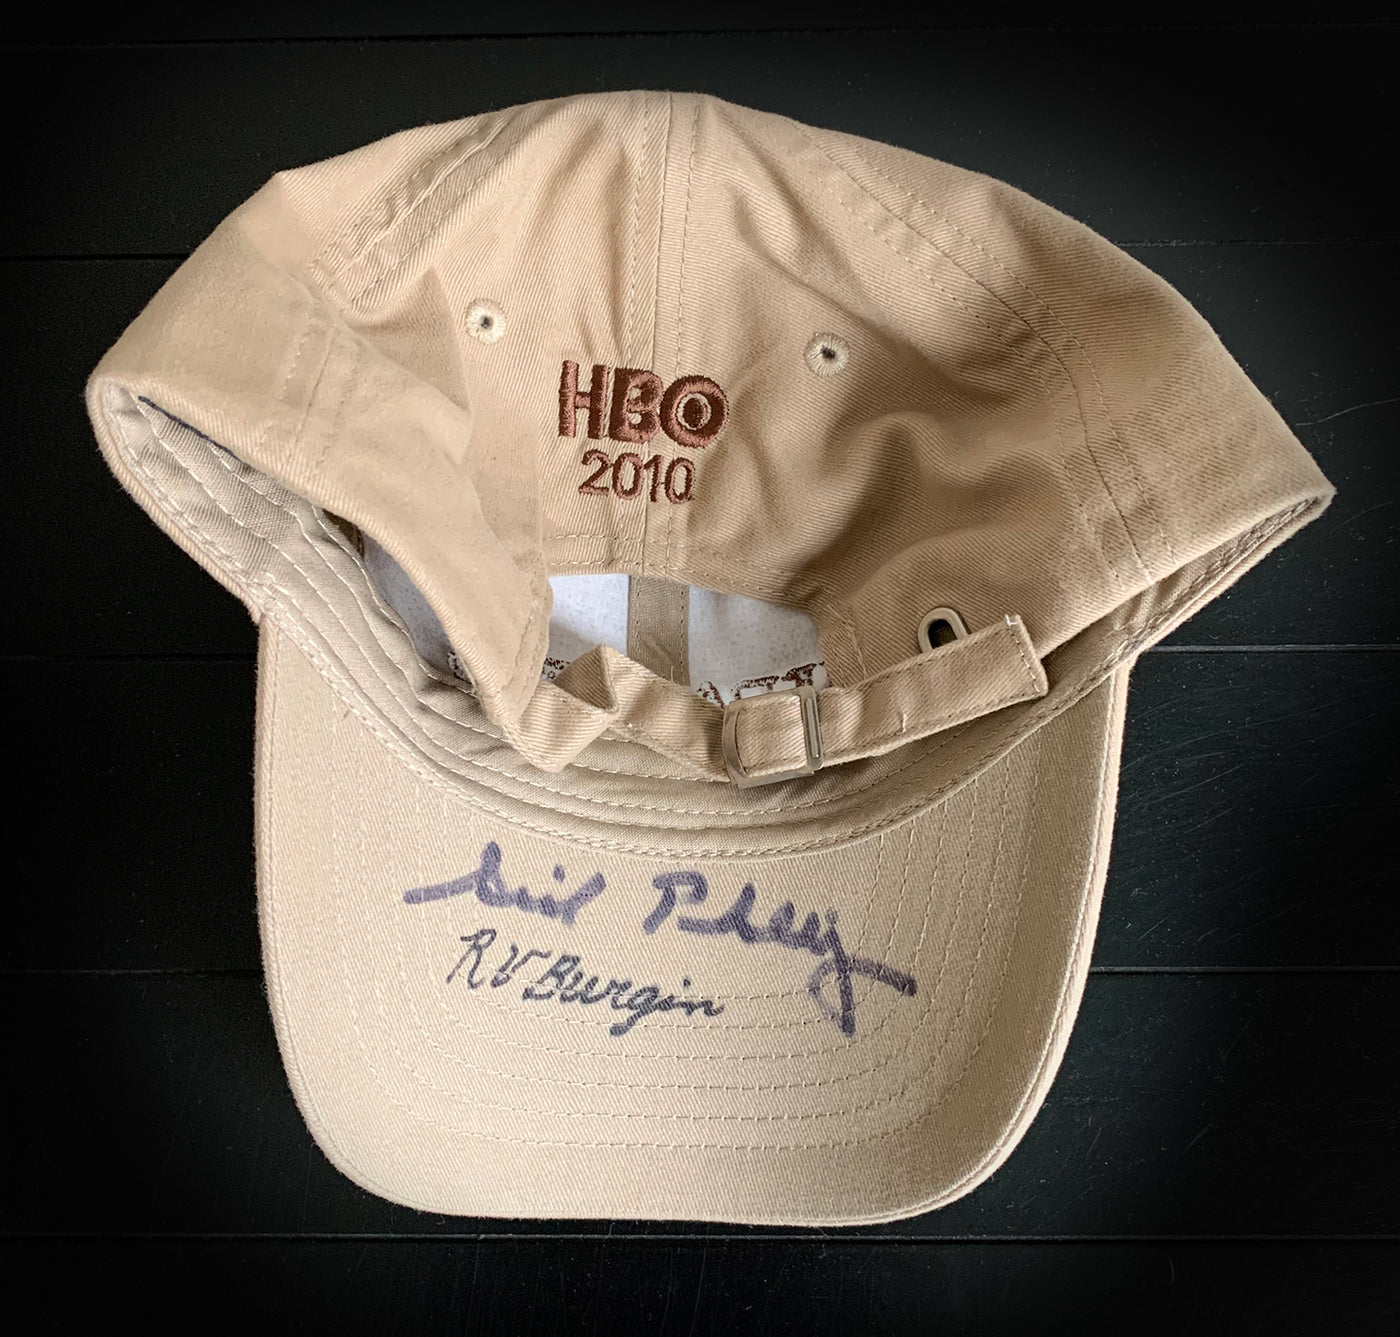 "The Pacific" Hat Signed Under Brim